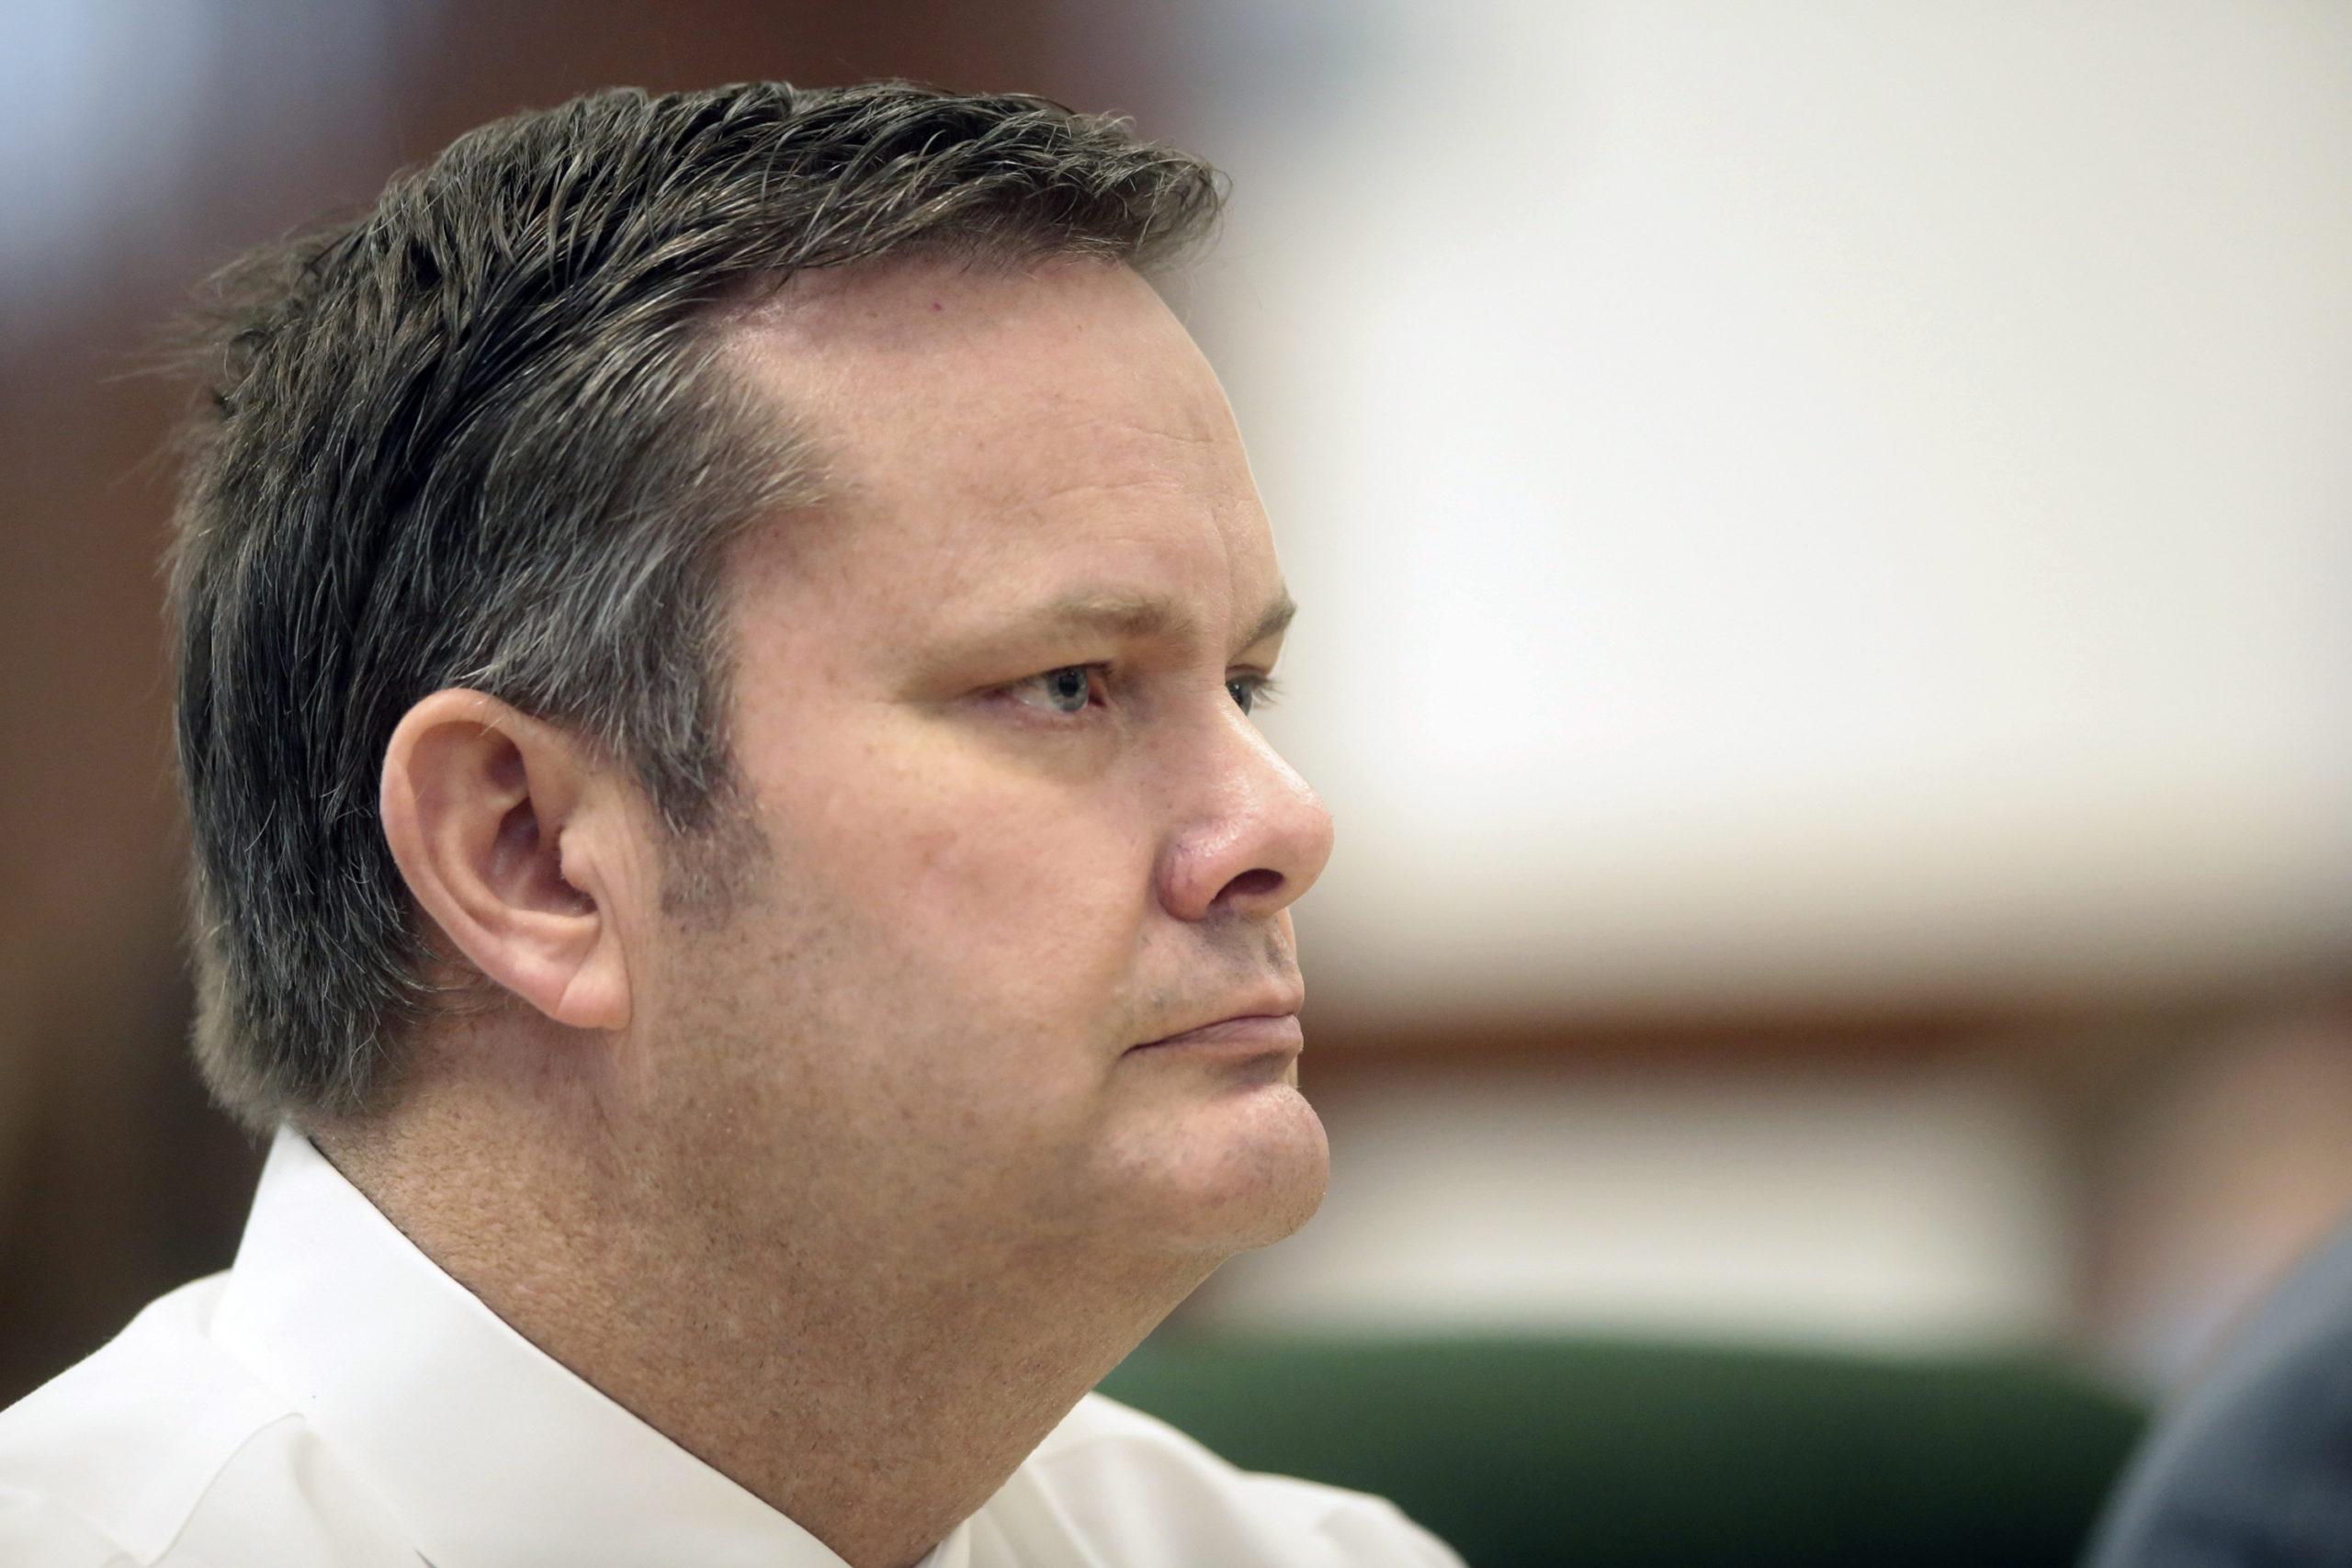 FILE - Chad Daybell appears during a court hearing in St. Anthony, Idaho, Aug. 4, 2020.  (John Roar...